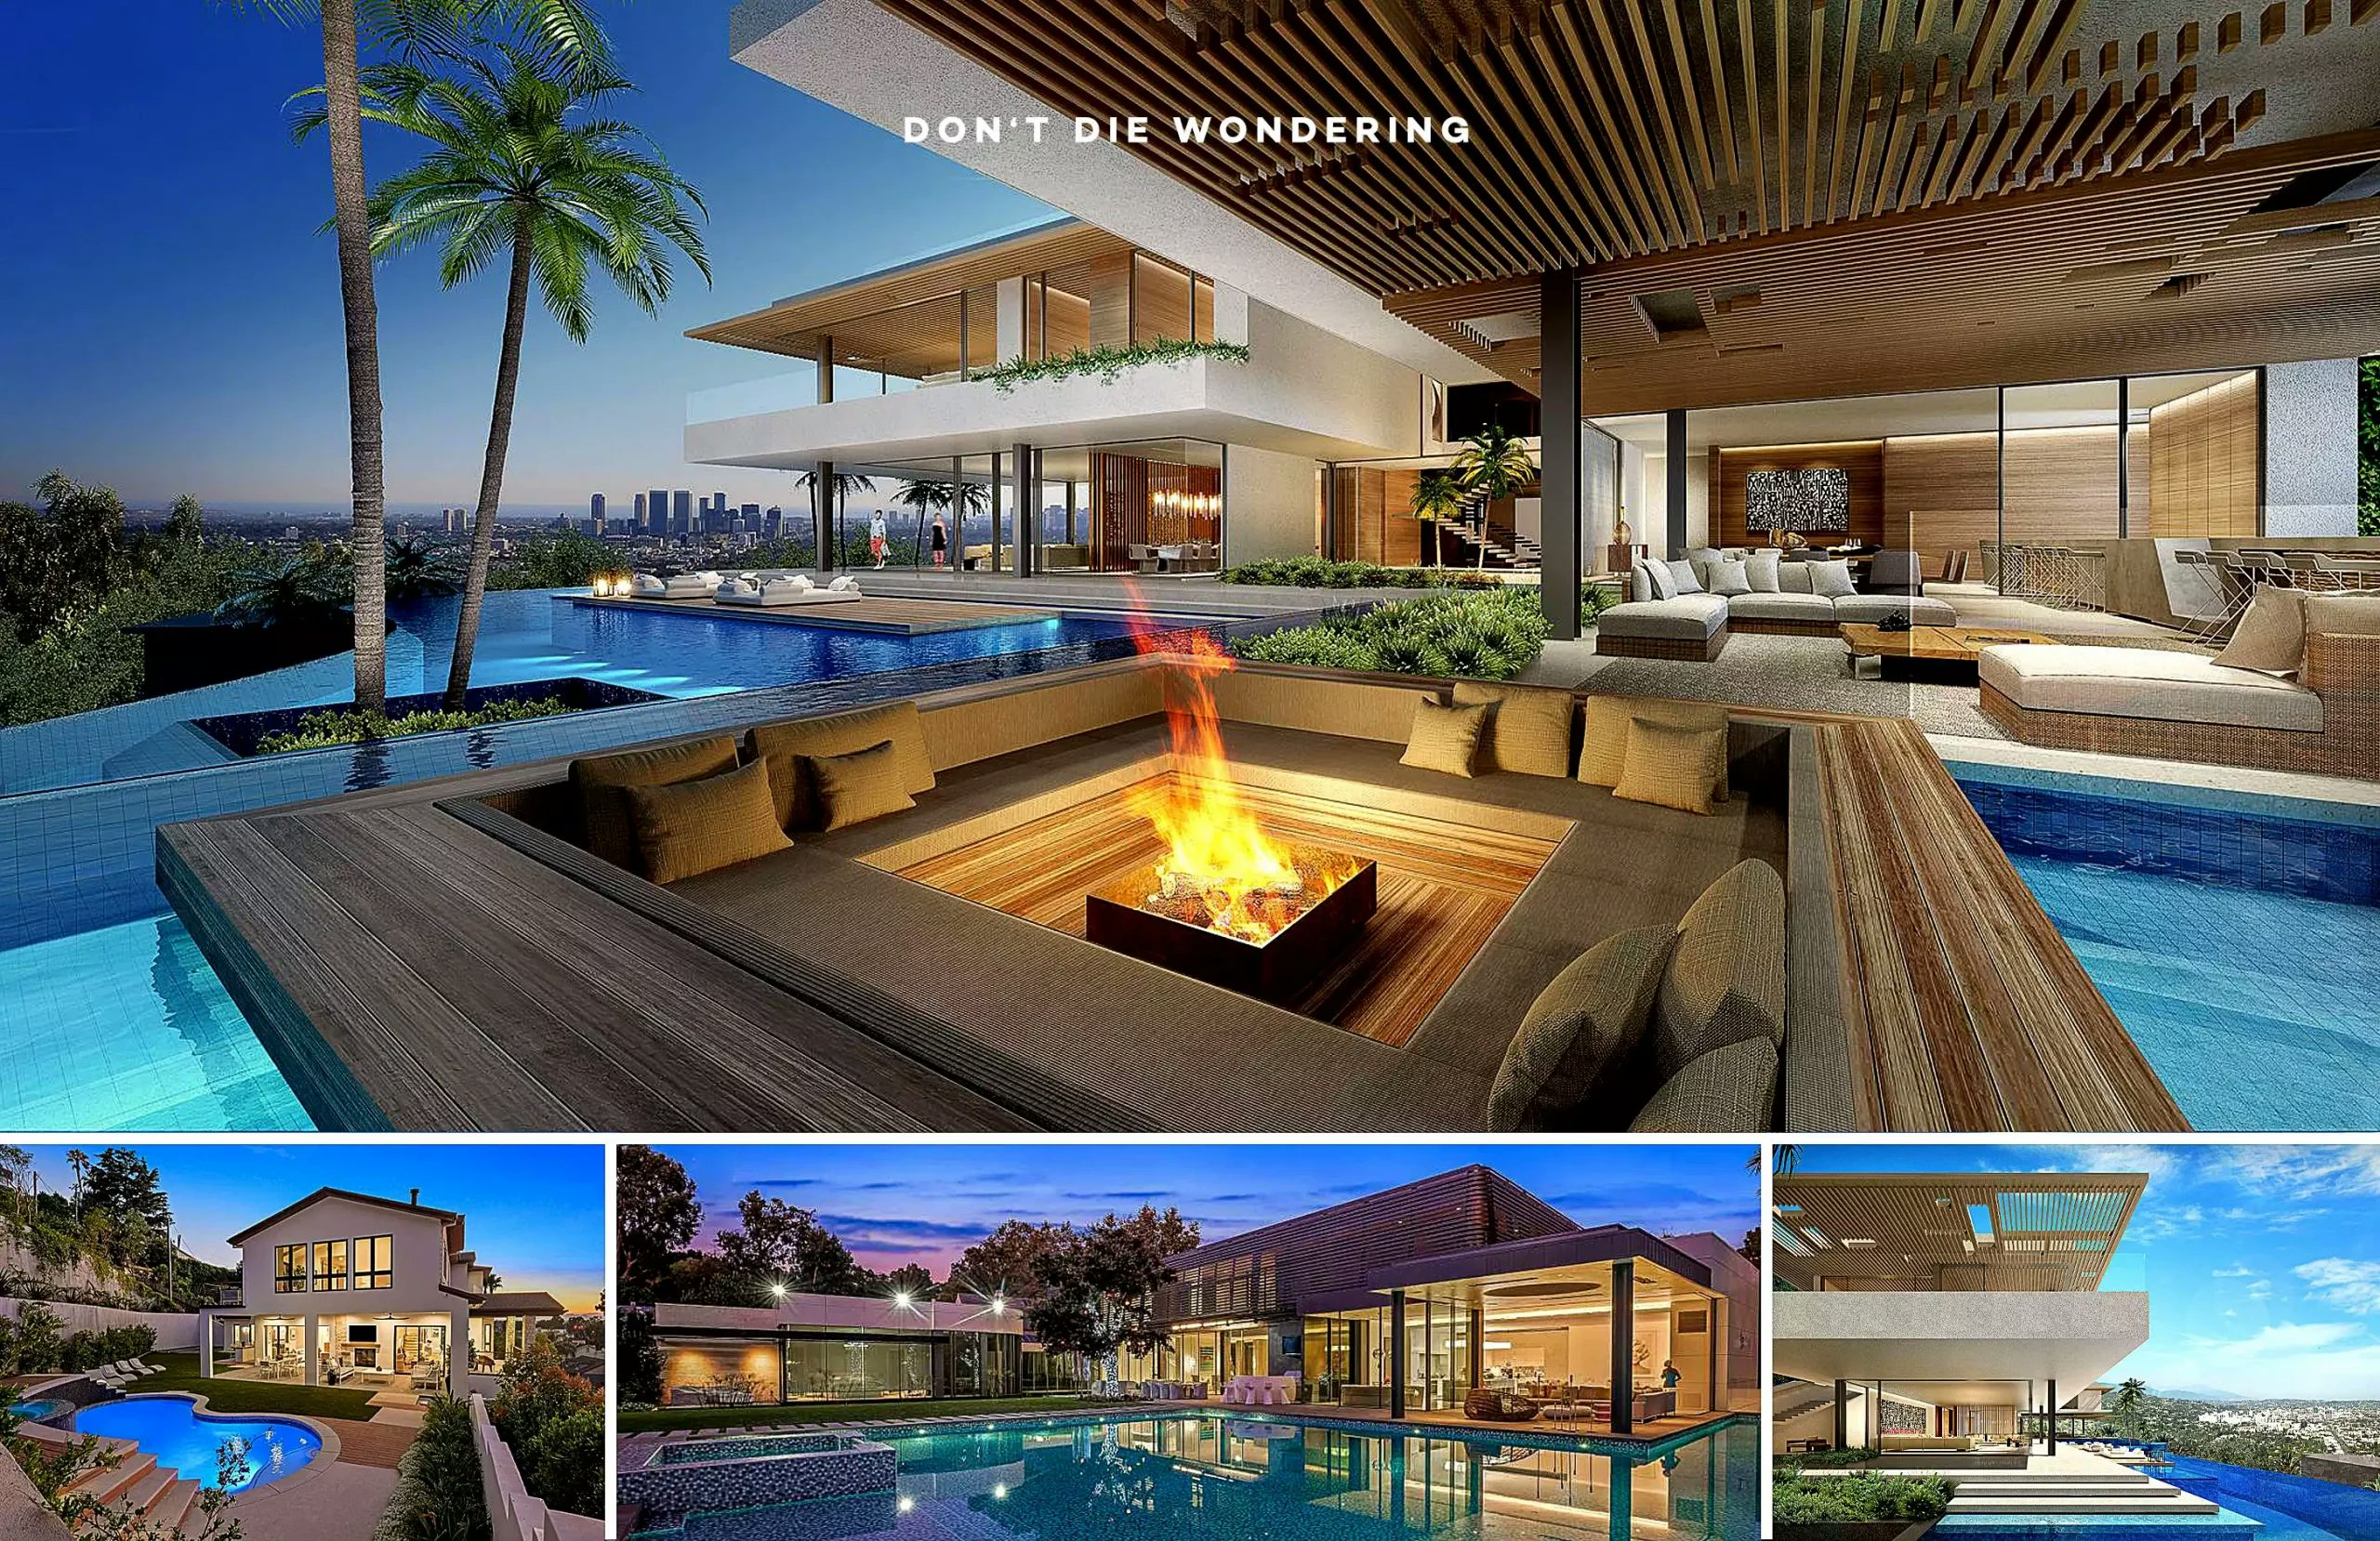 The 6 Most Expensive Properties Featured on Selling Sunset